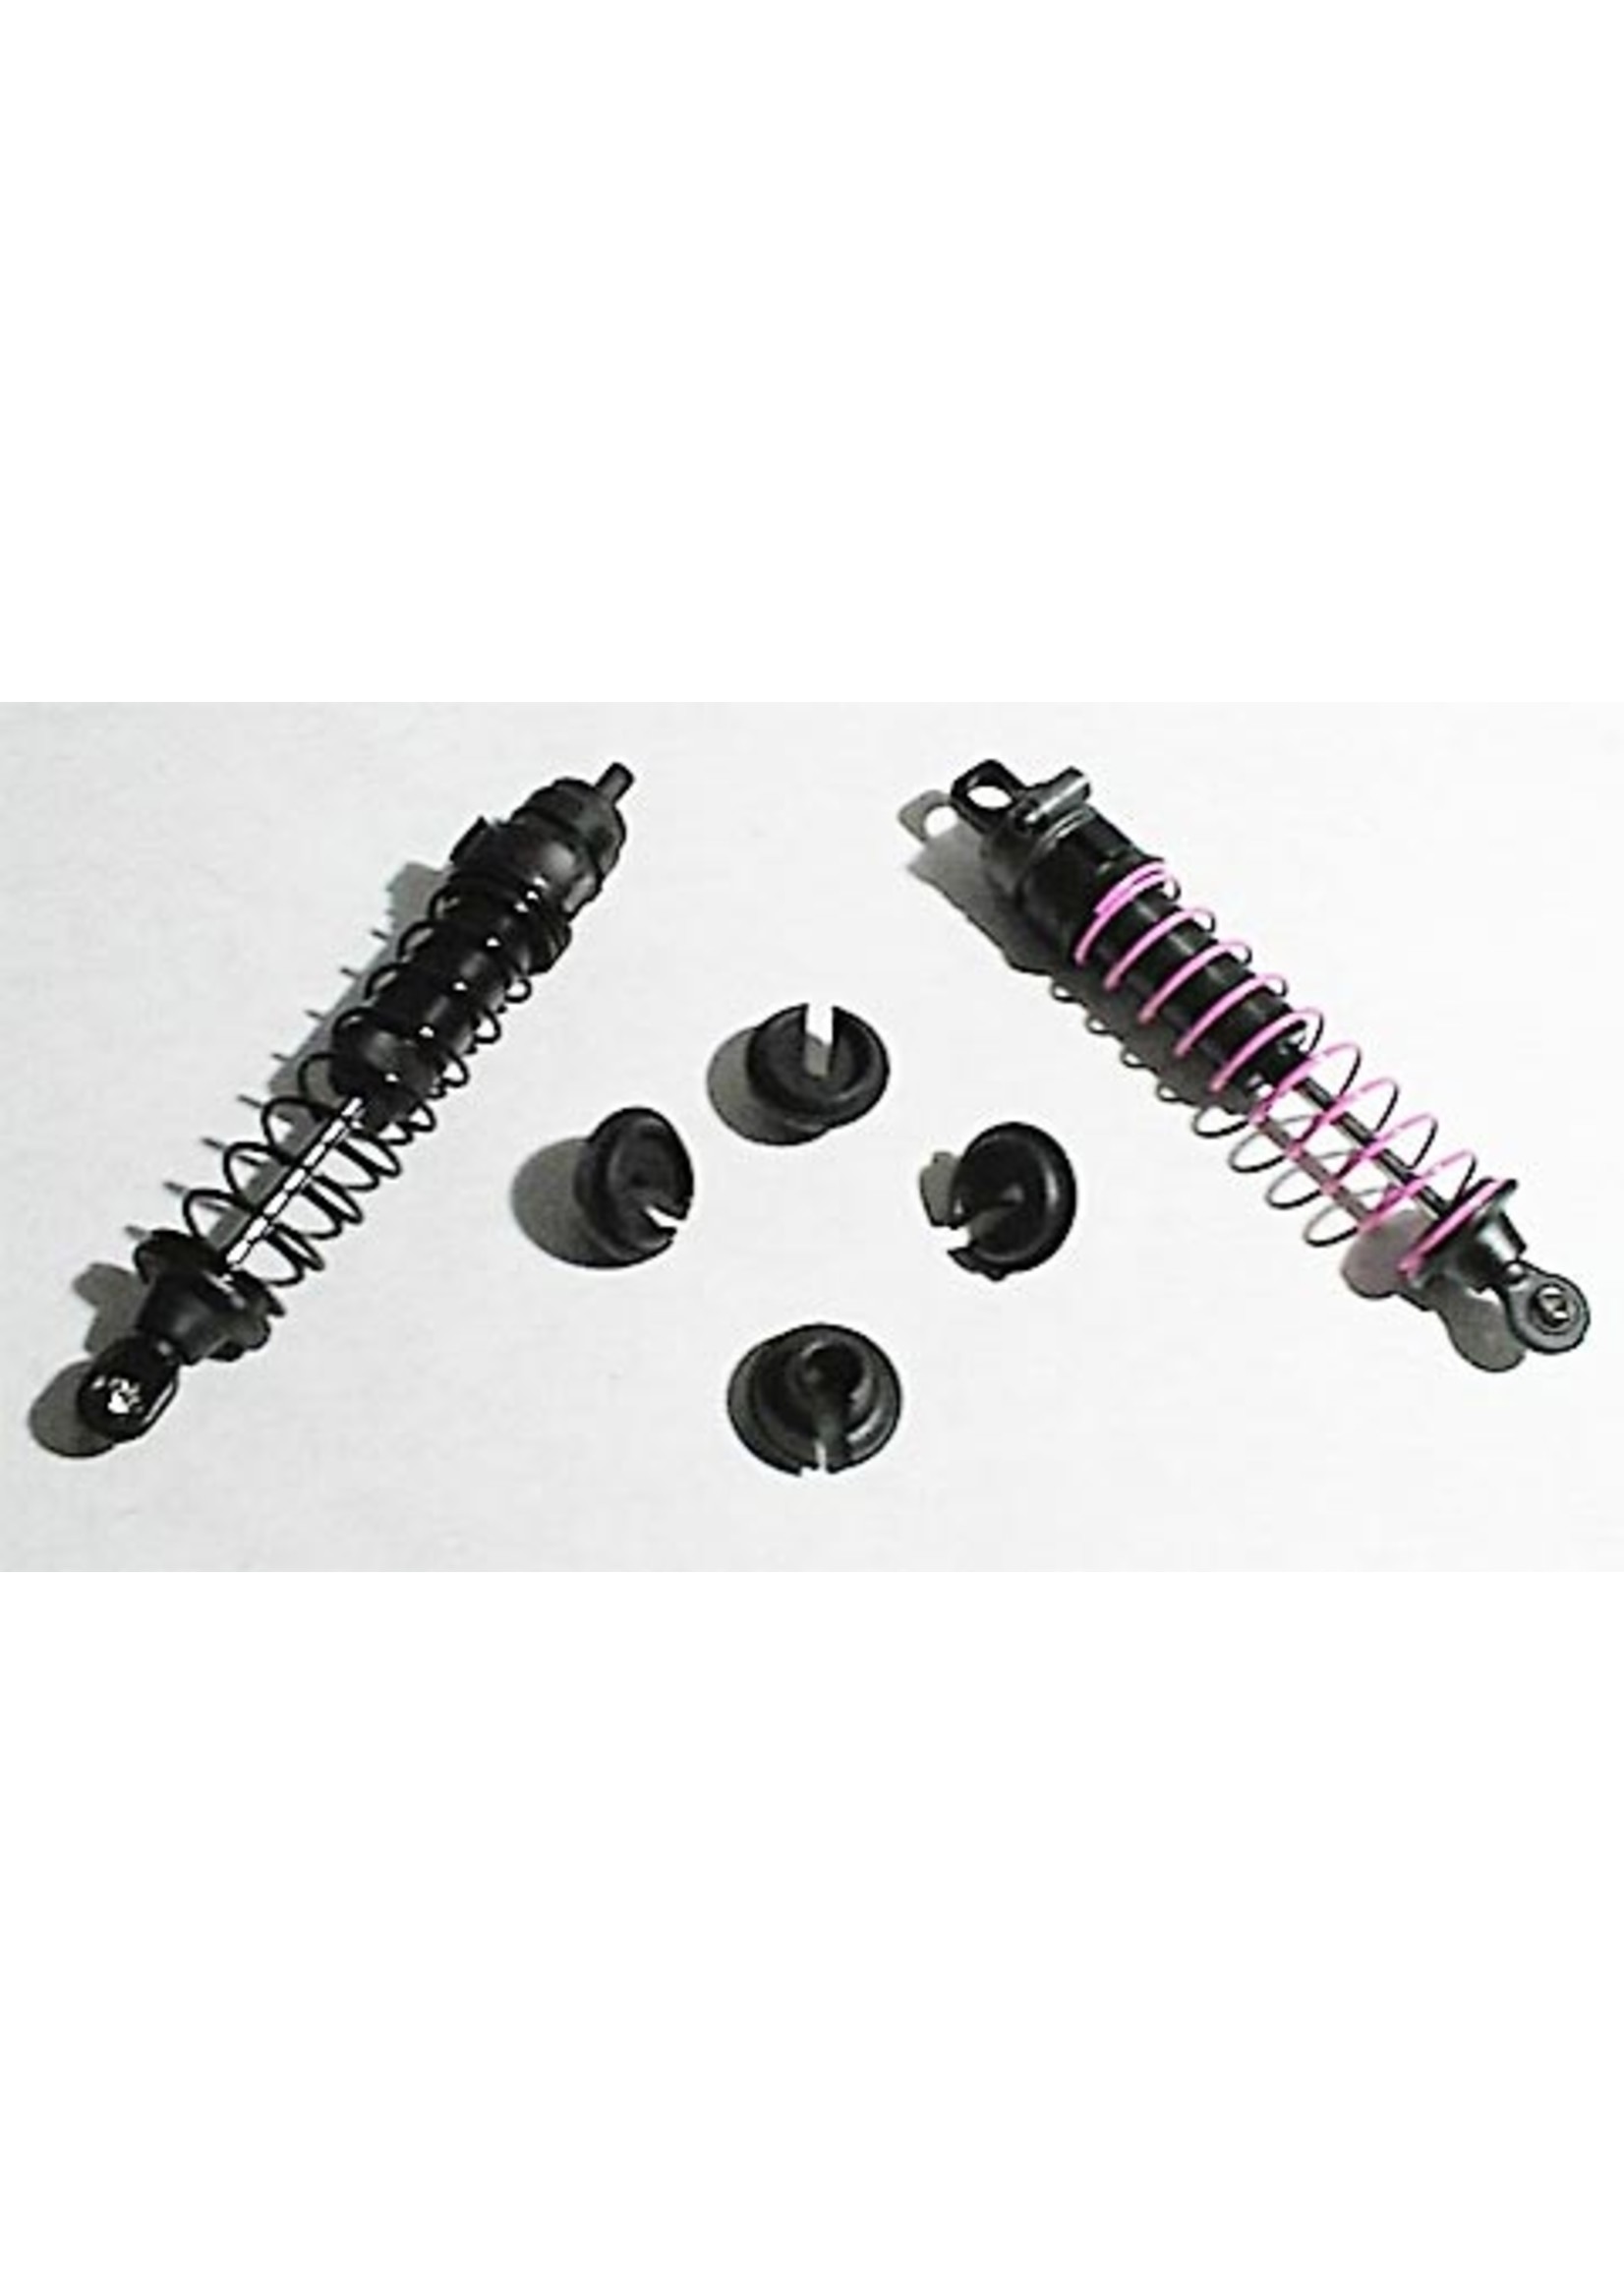 RPM 73152 - Black Lower Shock Spring Cups for Traxxas, HPI & Losi Shocks